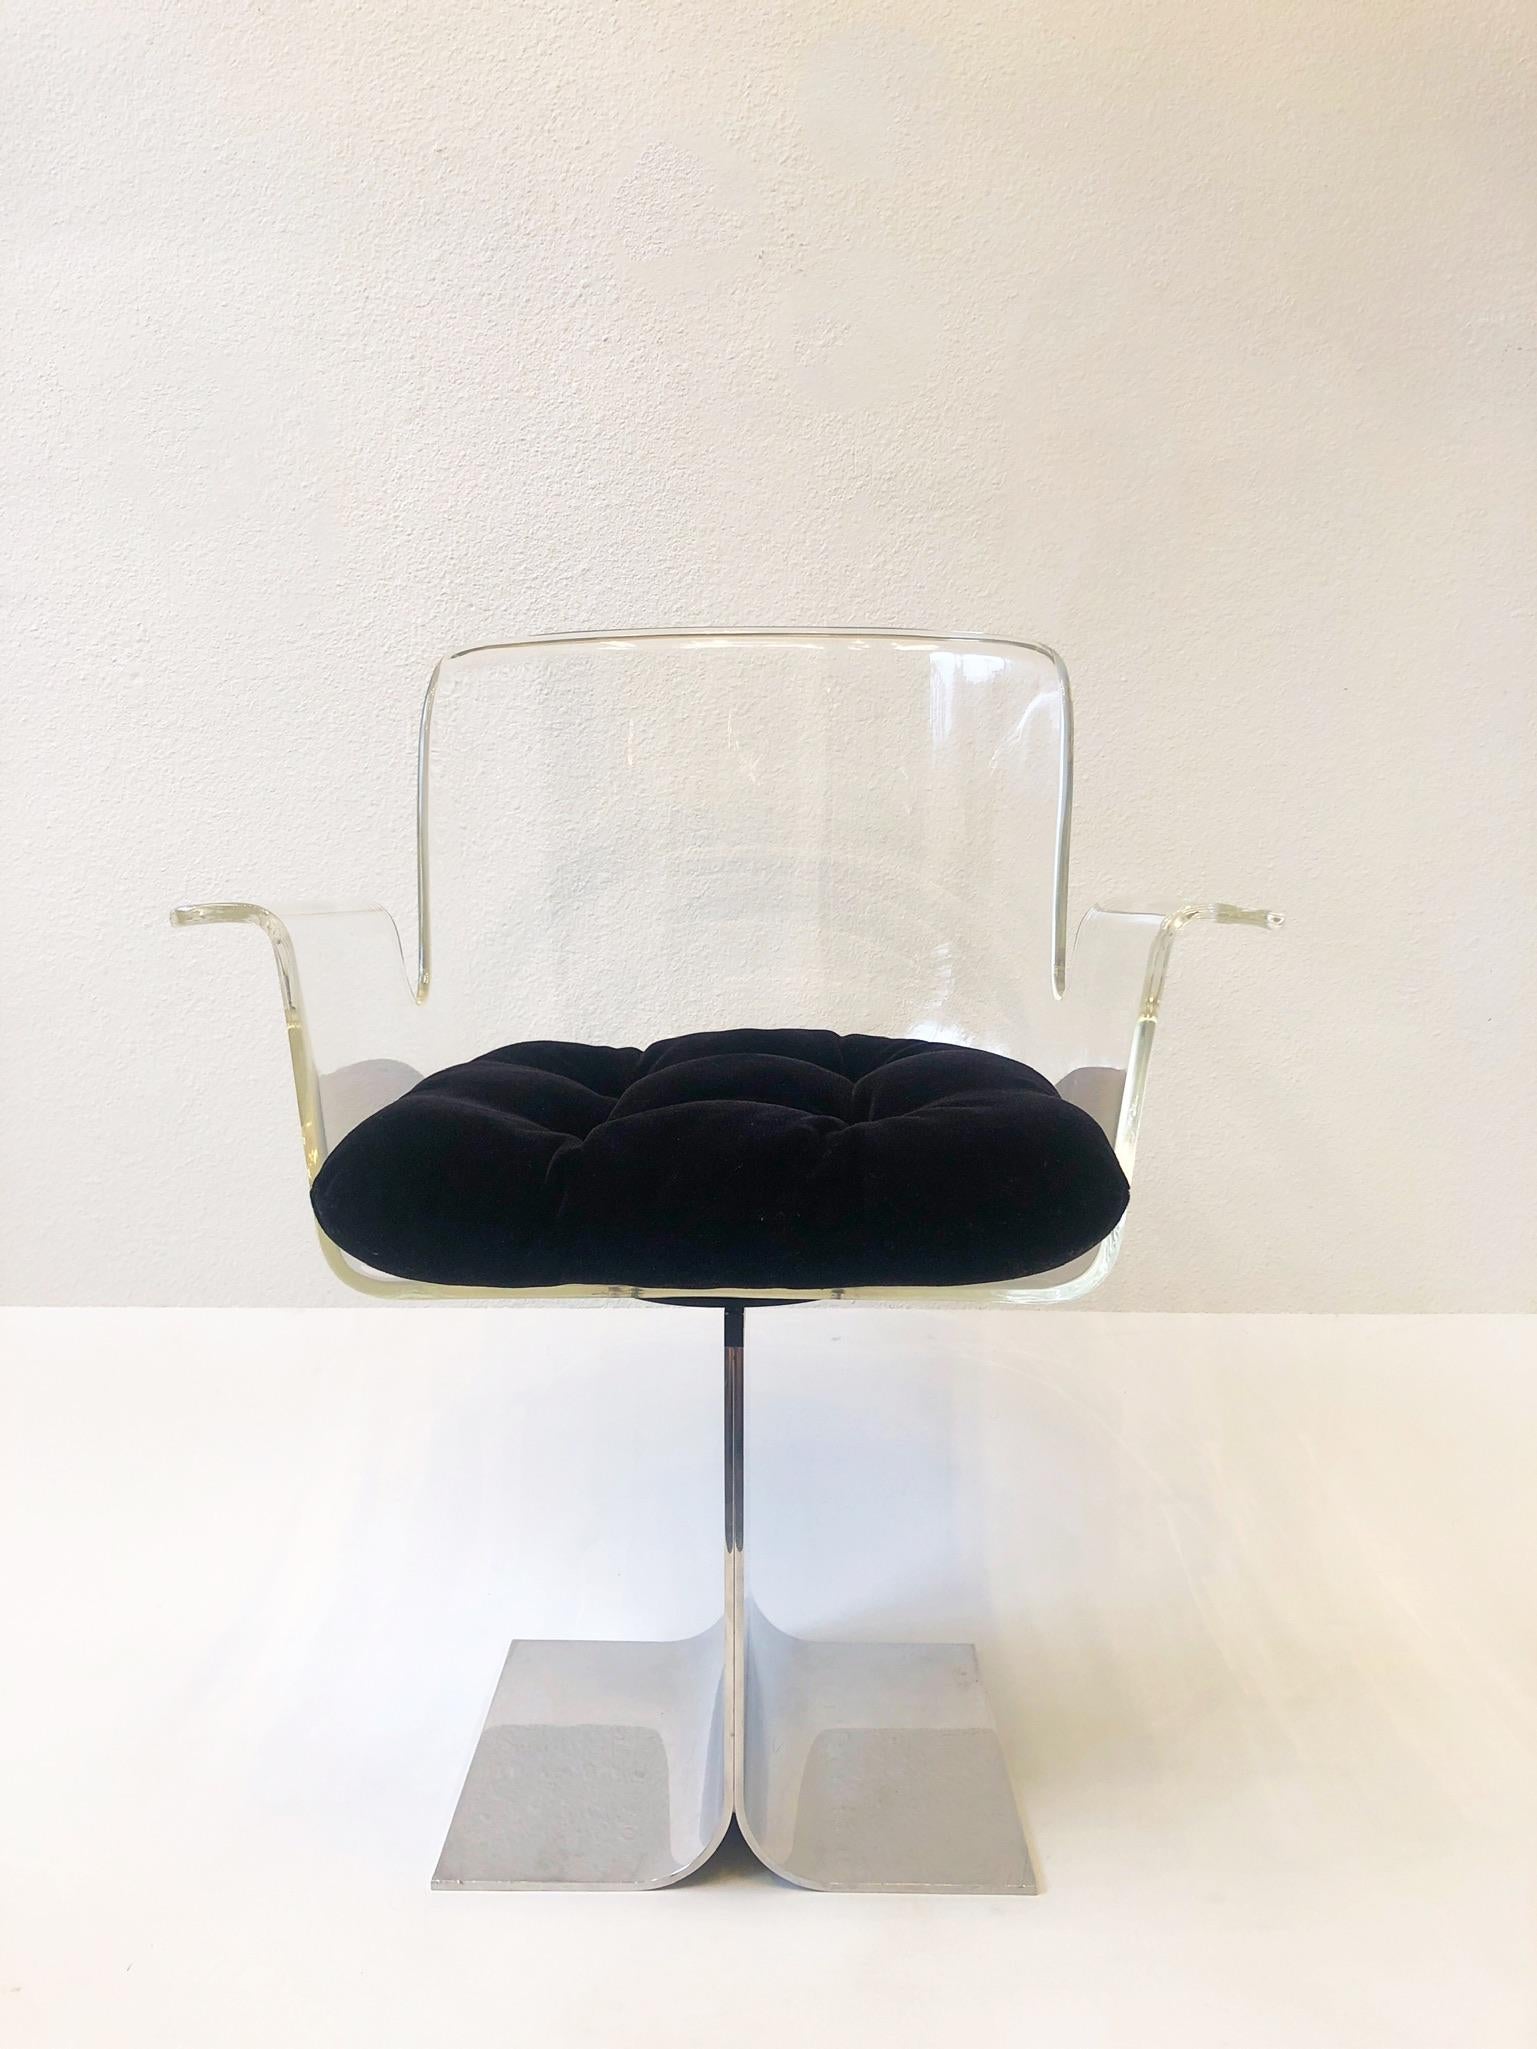 Pair of 1970 clear lucite and polished aluminum 180 swivel chairs by Pace collection.
The seat cushions are black mohair. 
The aluminum bases have been newly professionally polished. One of the chairs show slight crazing (see detail